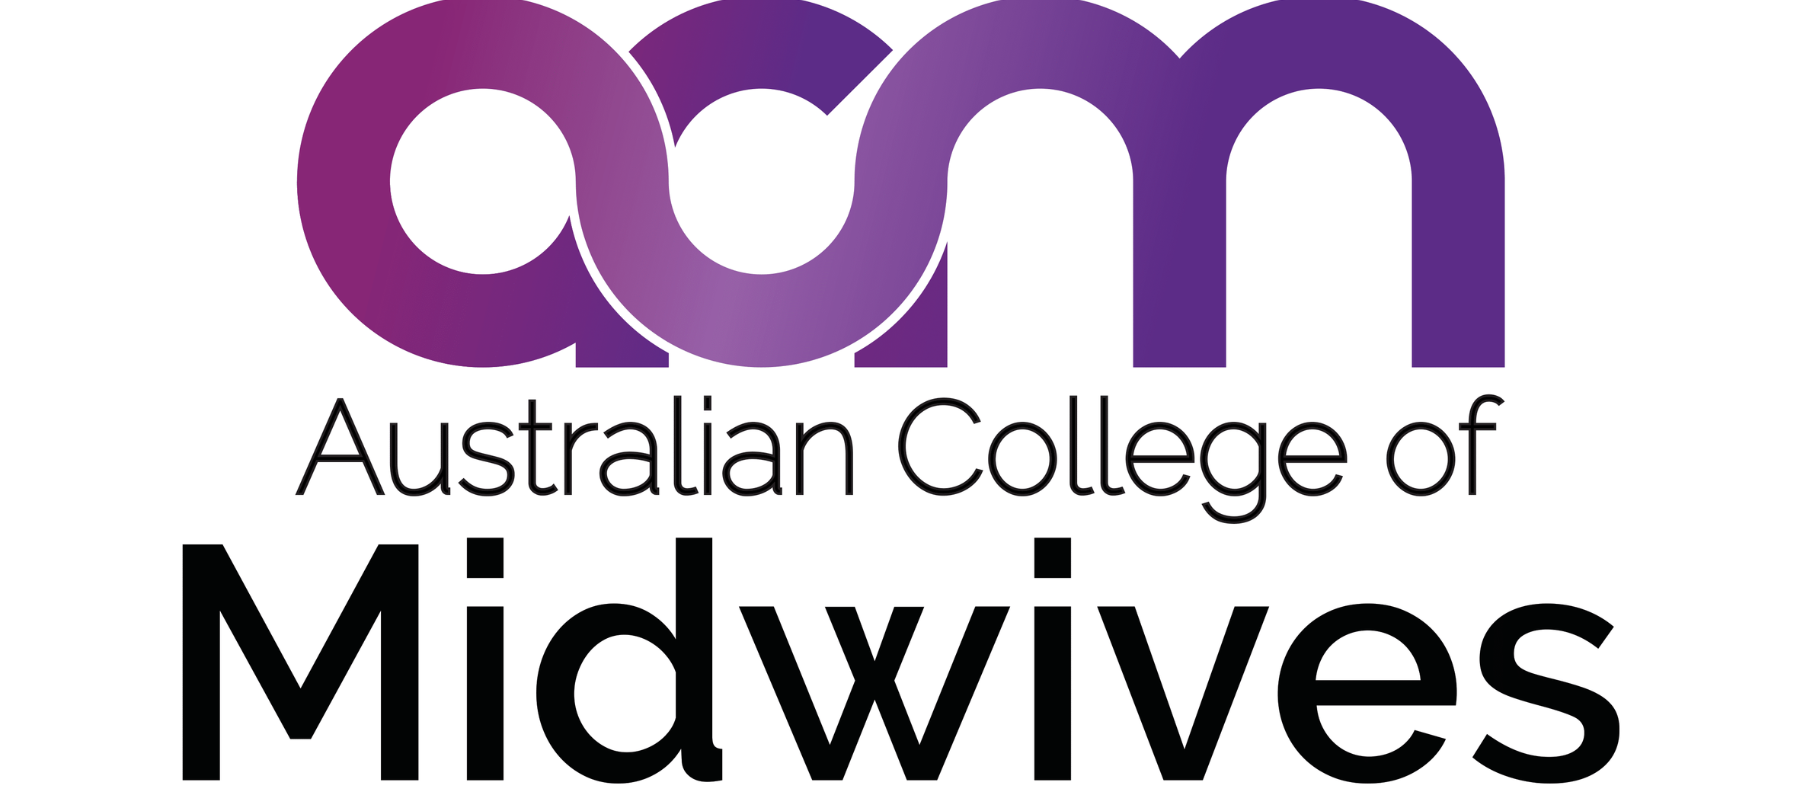 We’re now endorsed by the Australian College of Midwives!